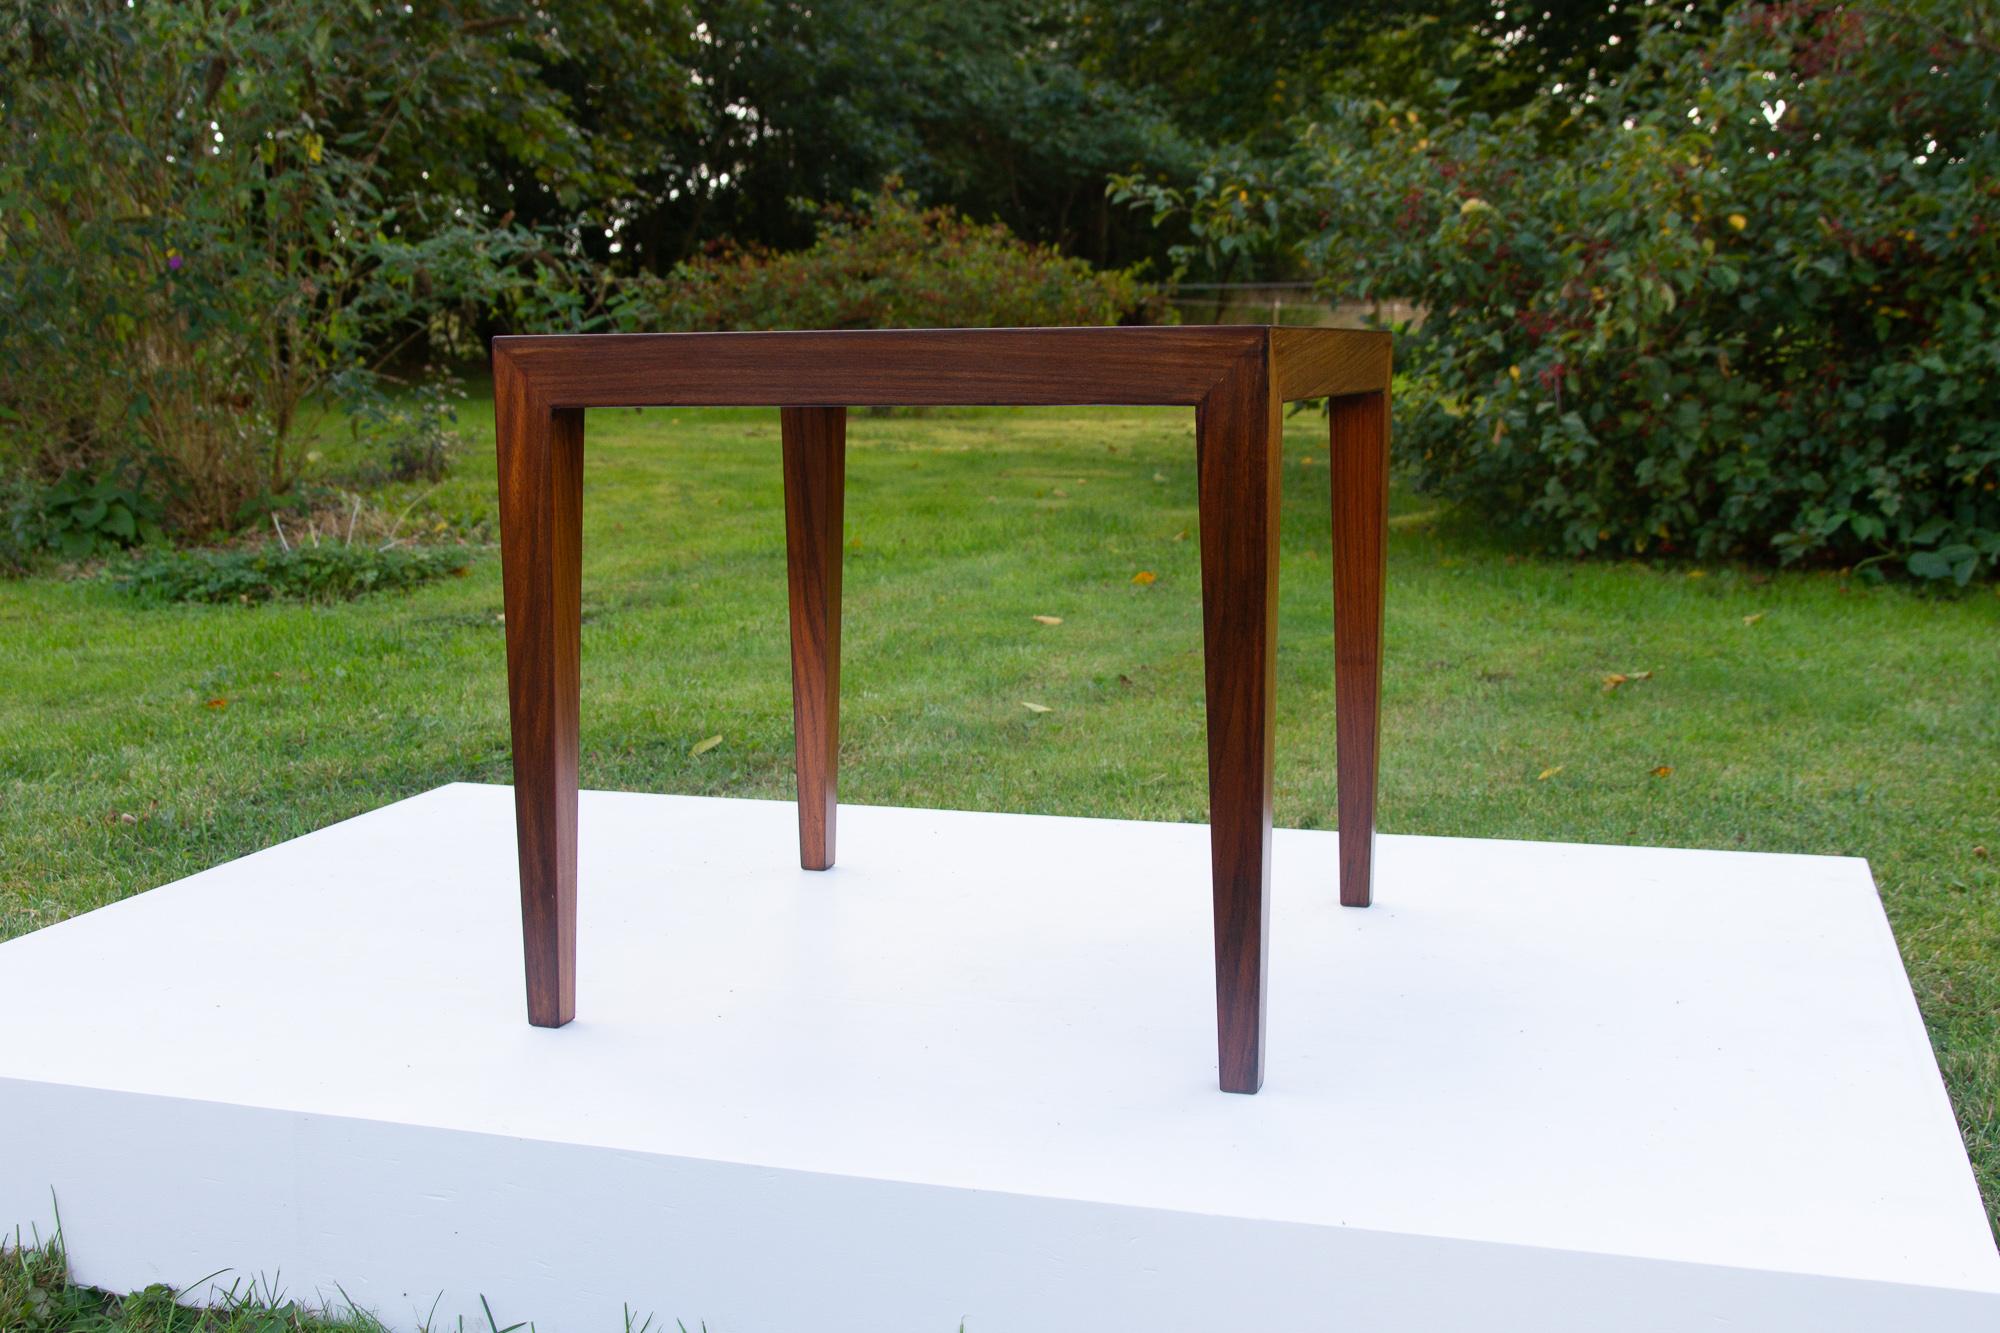 Vintage Danish Rosewood Coffee table by Severin Hansen, 1960s
Elegant and stylish mid-century modern table by Danish designer Severin Hansen and manufactured by Haslev Møbelsnedkeri, Denmark.
Square design with the iconic corner joints that are